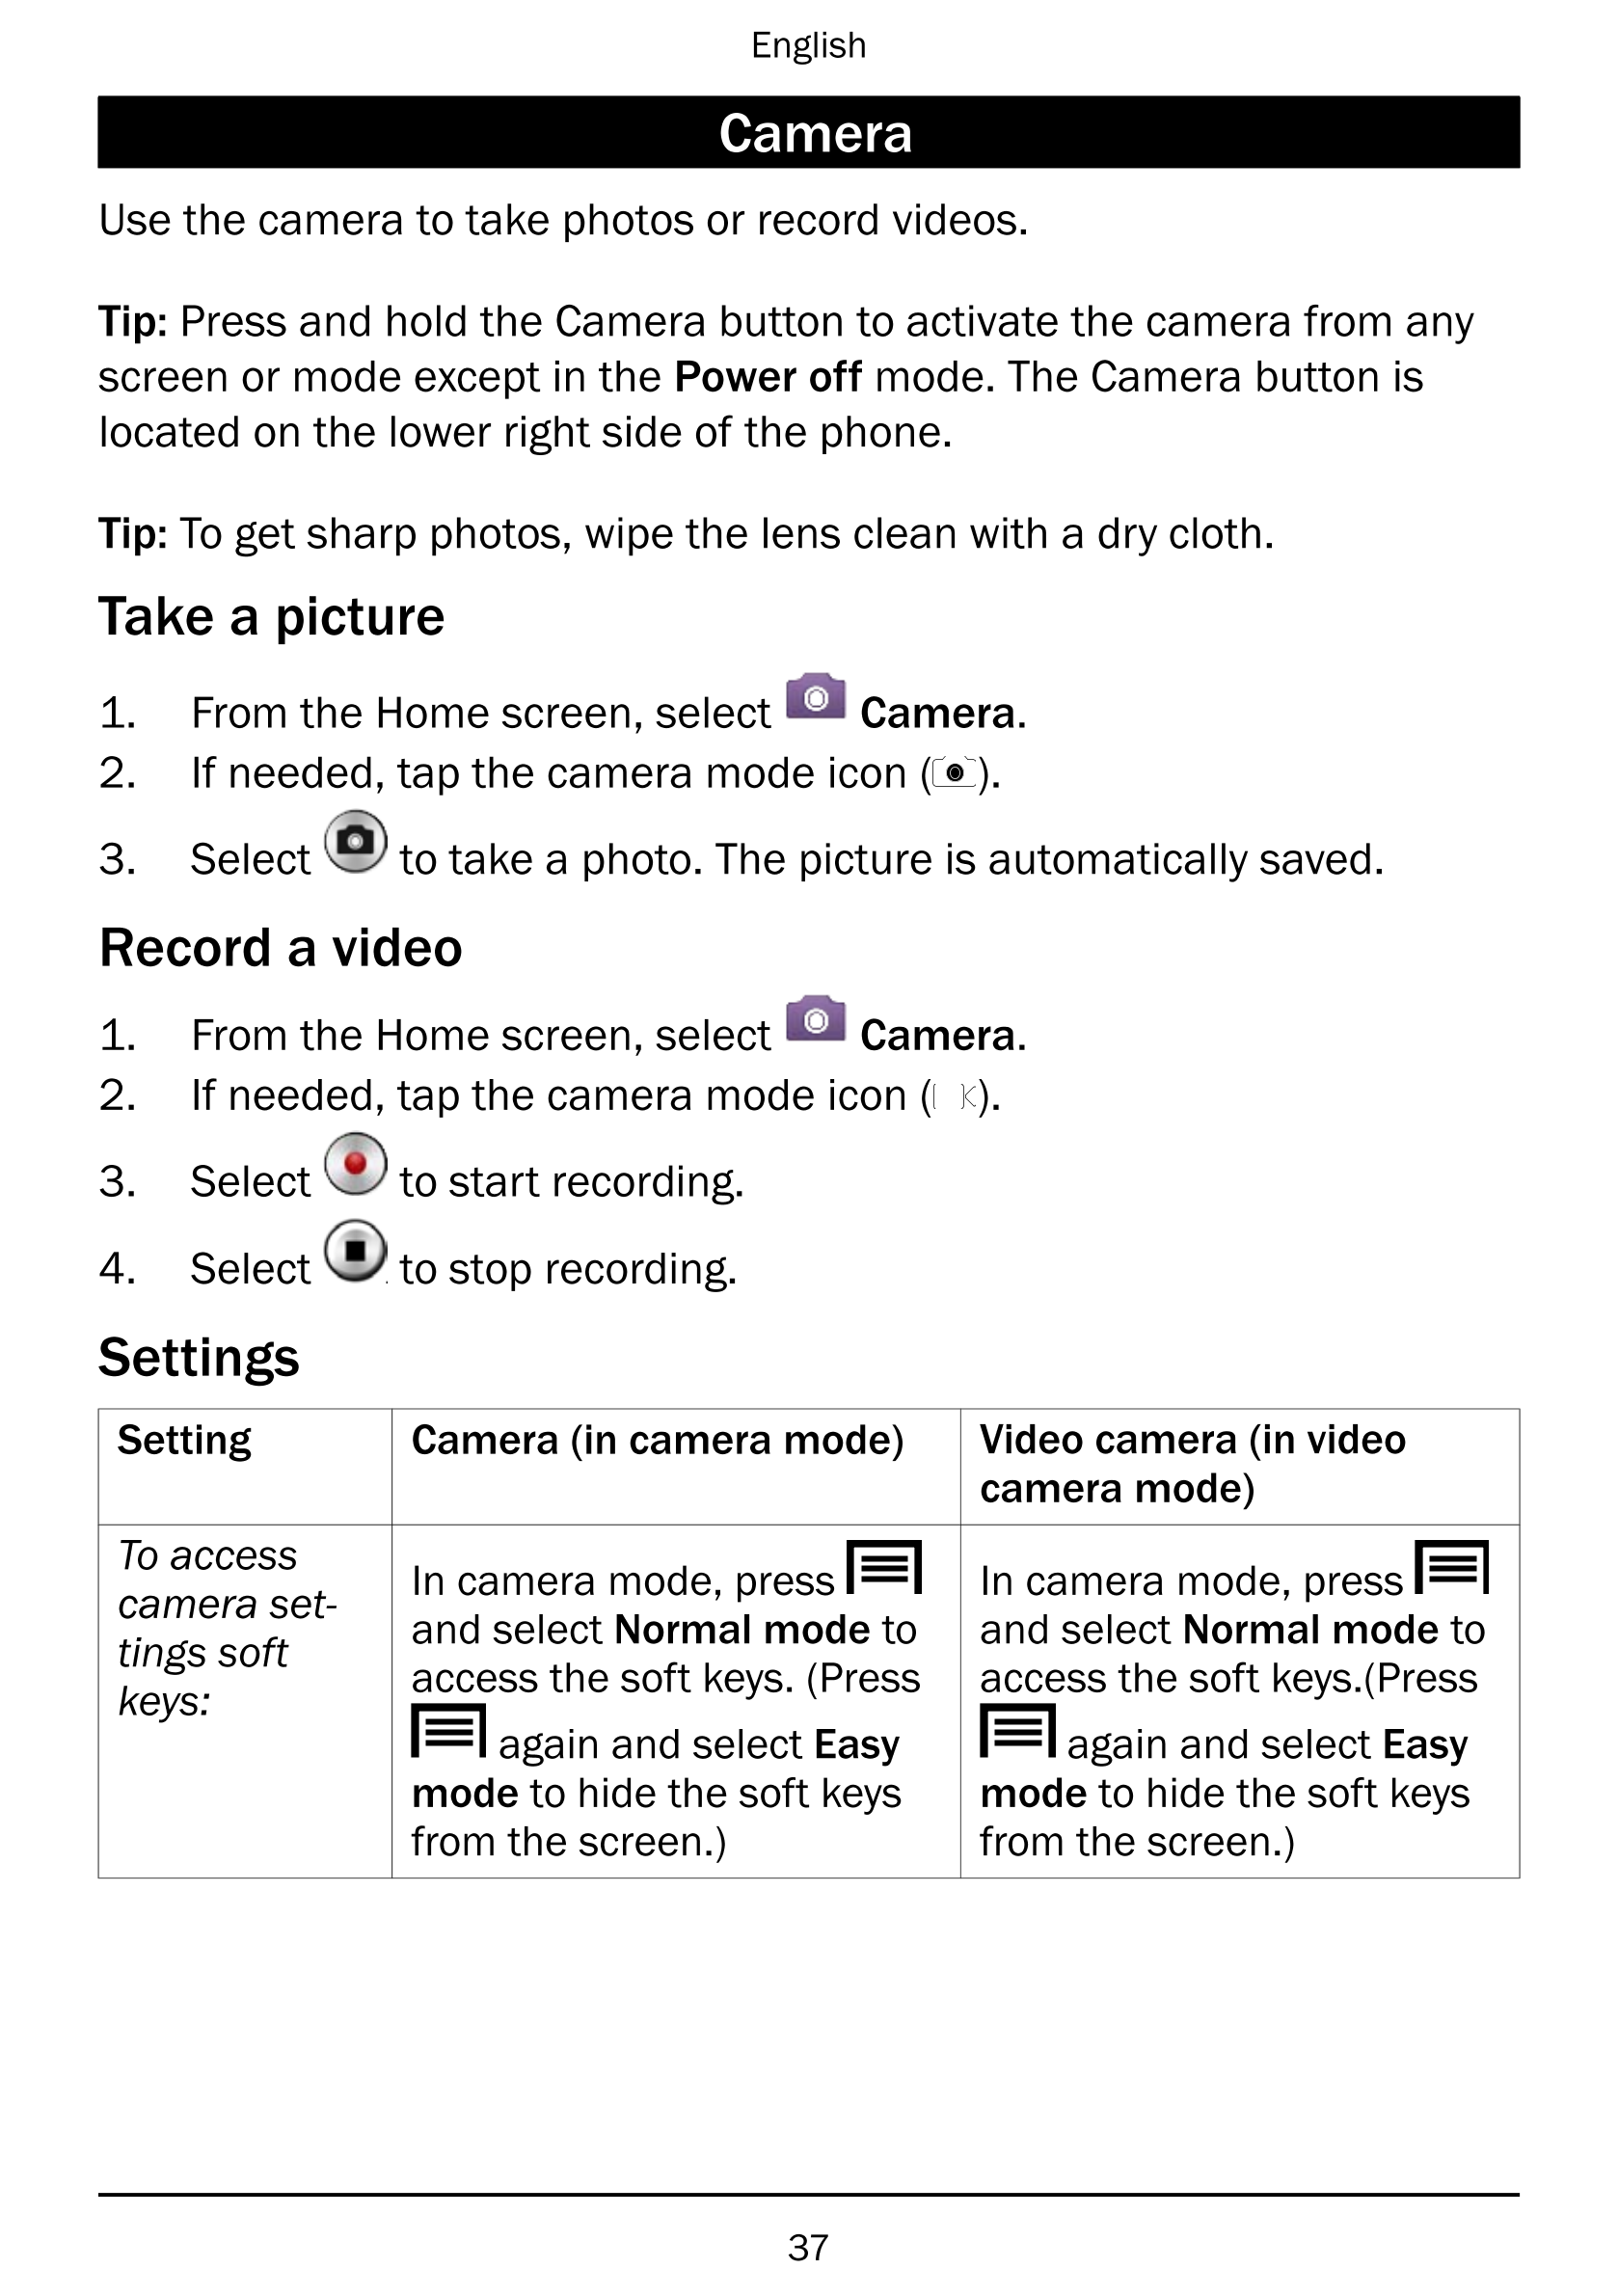 English
Camera
Use the camera to take photos or record videos.
Tip: Press and hold the Camera button to activate the camera from